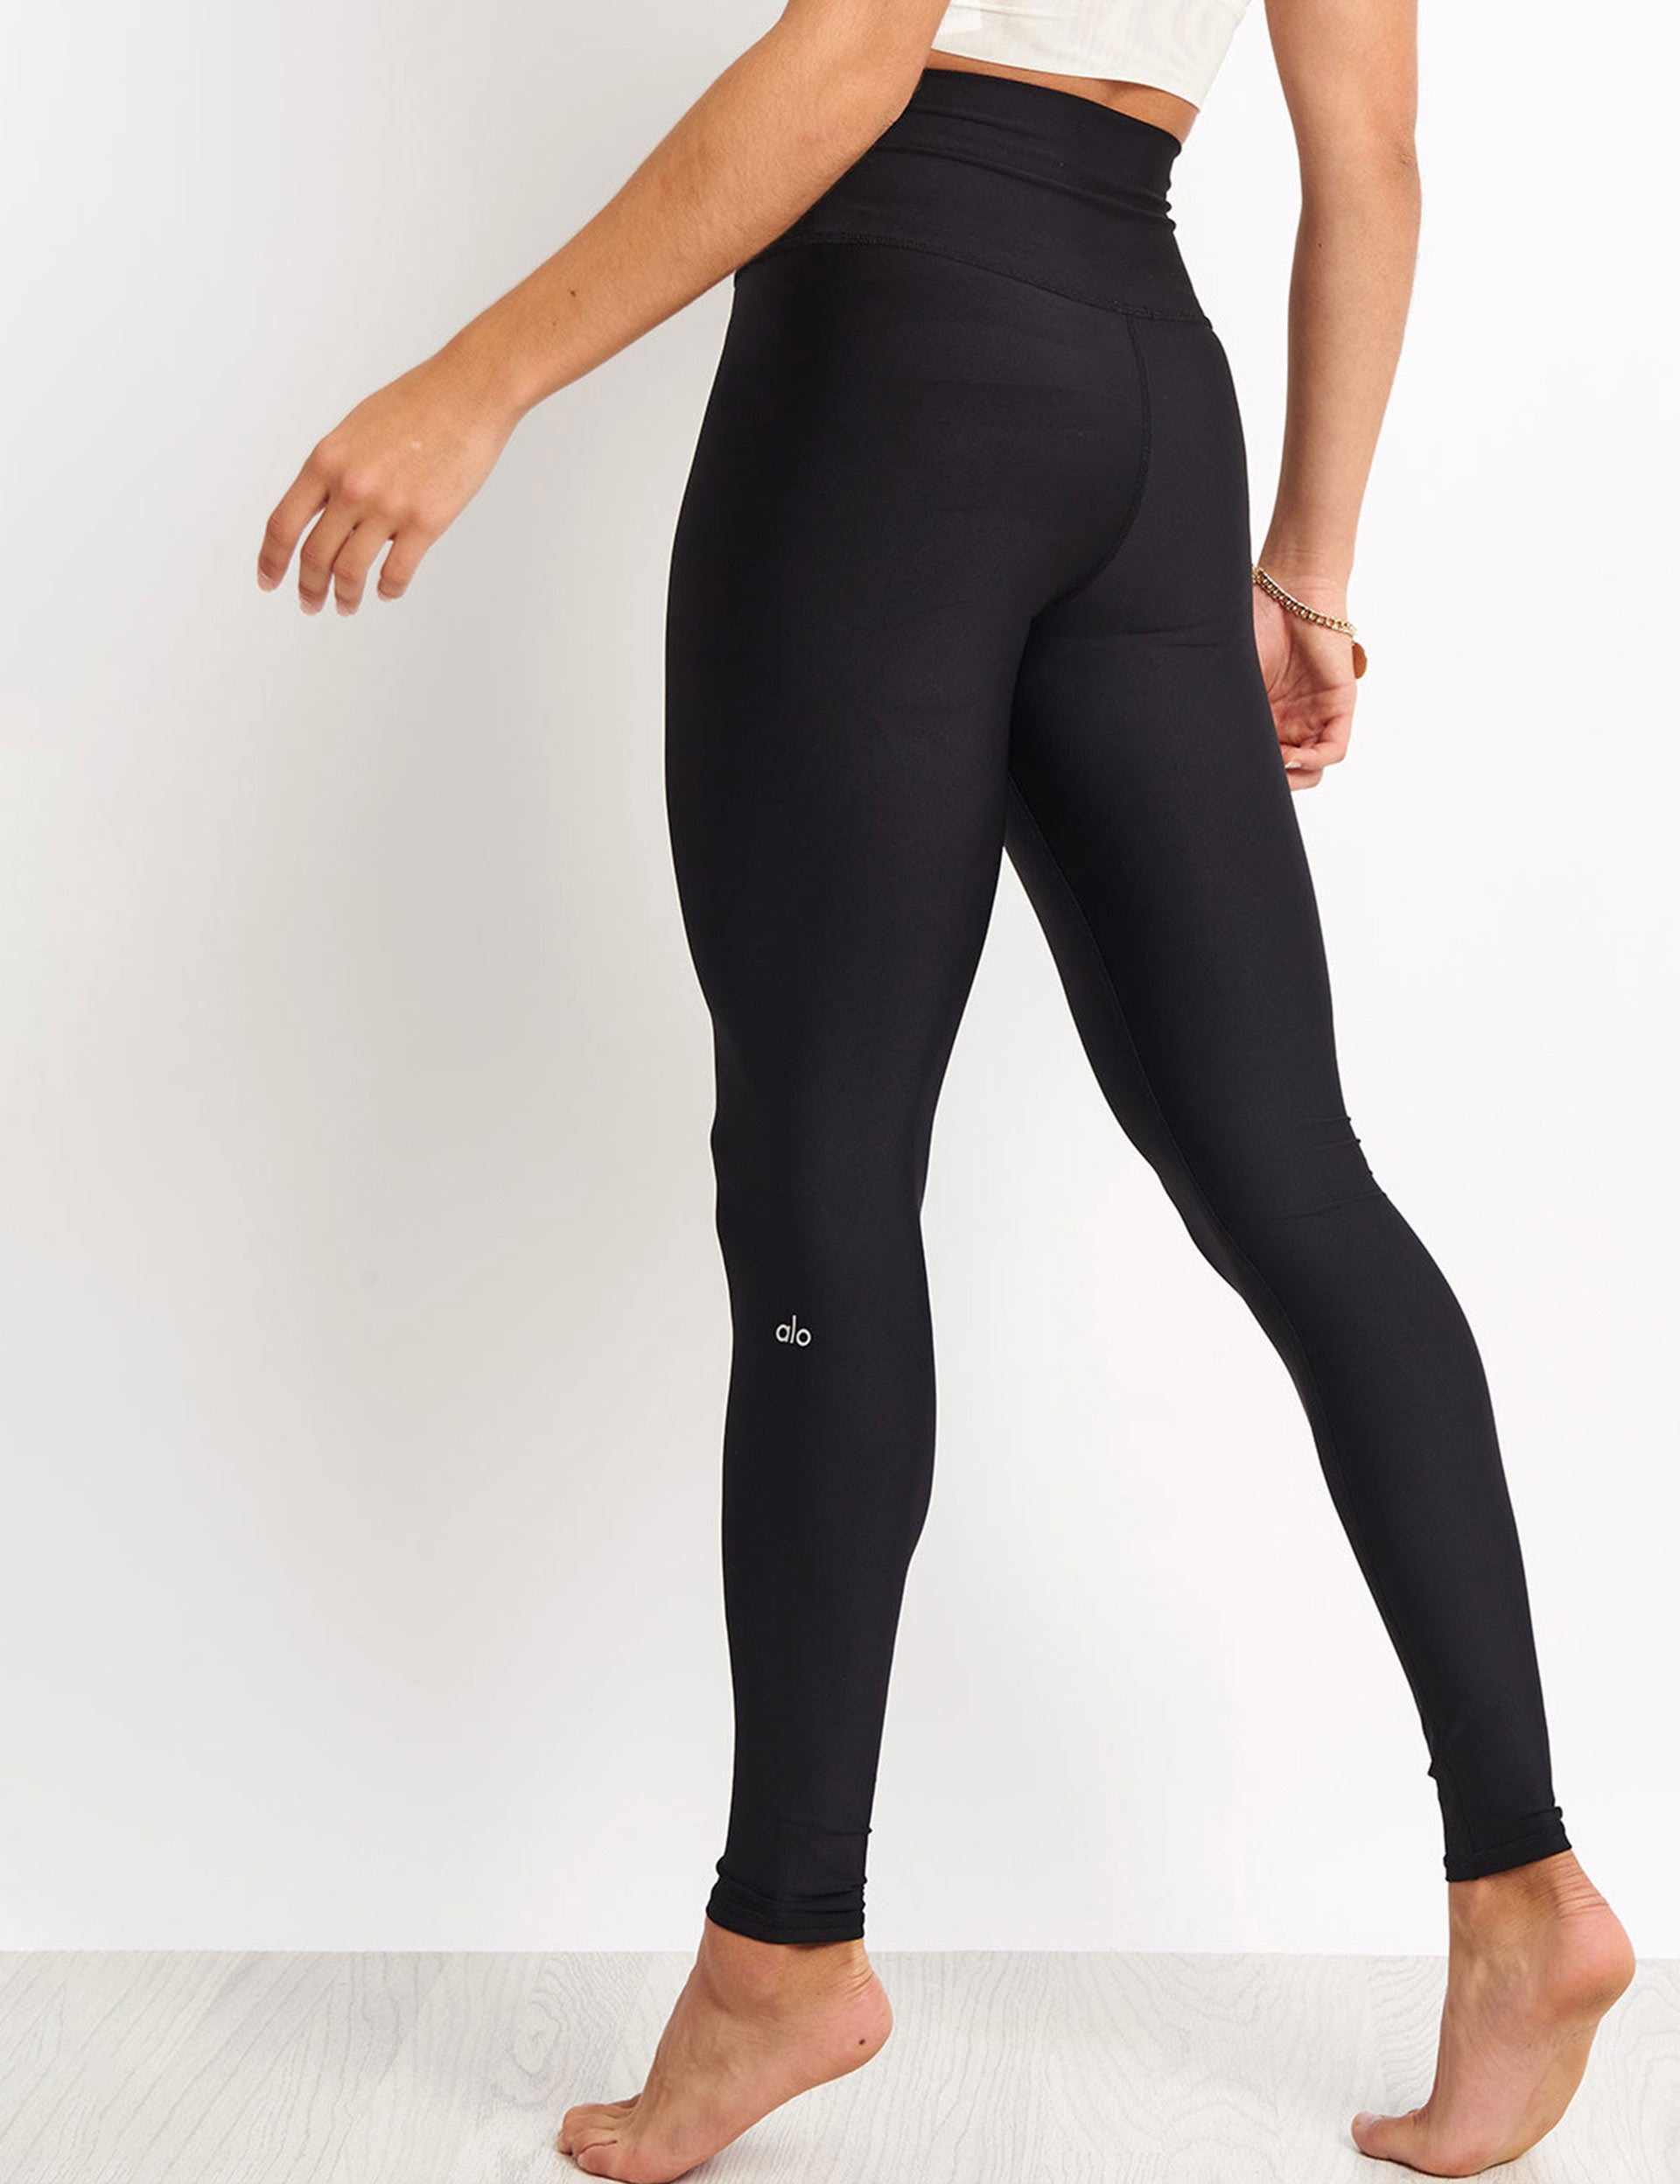 Black Warm Airlift Leggings by Alo on Sale